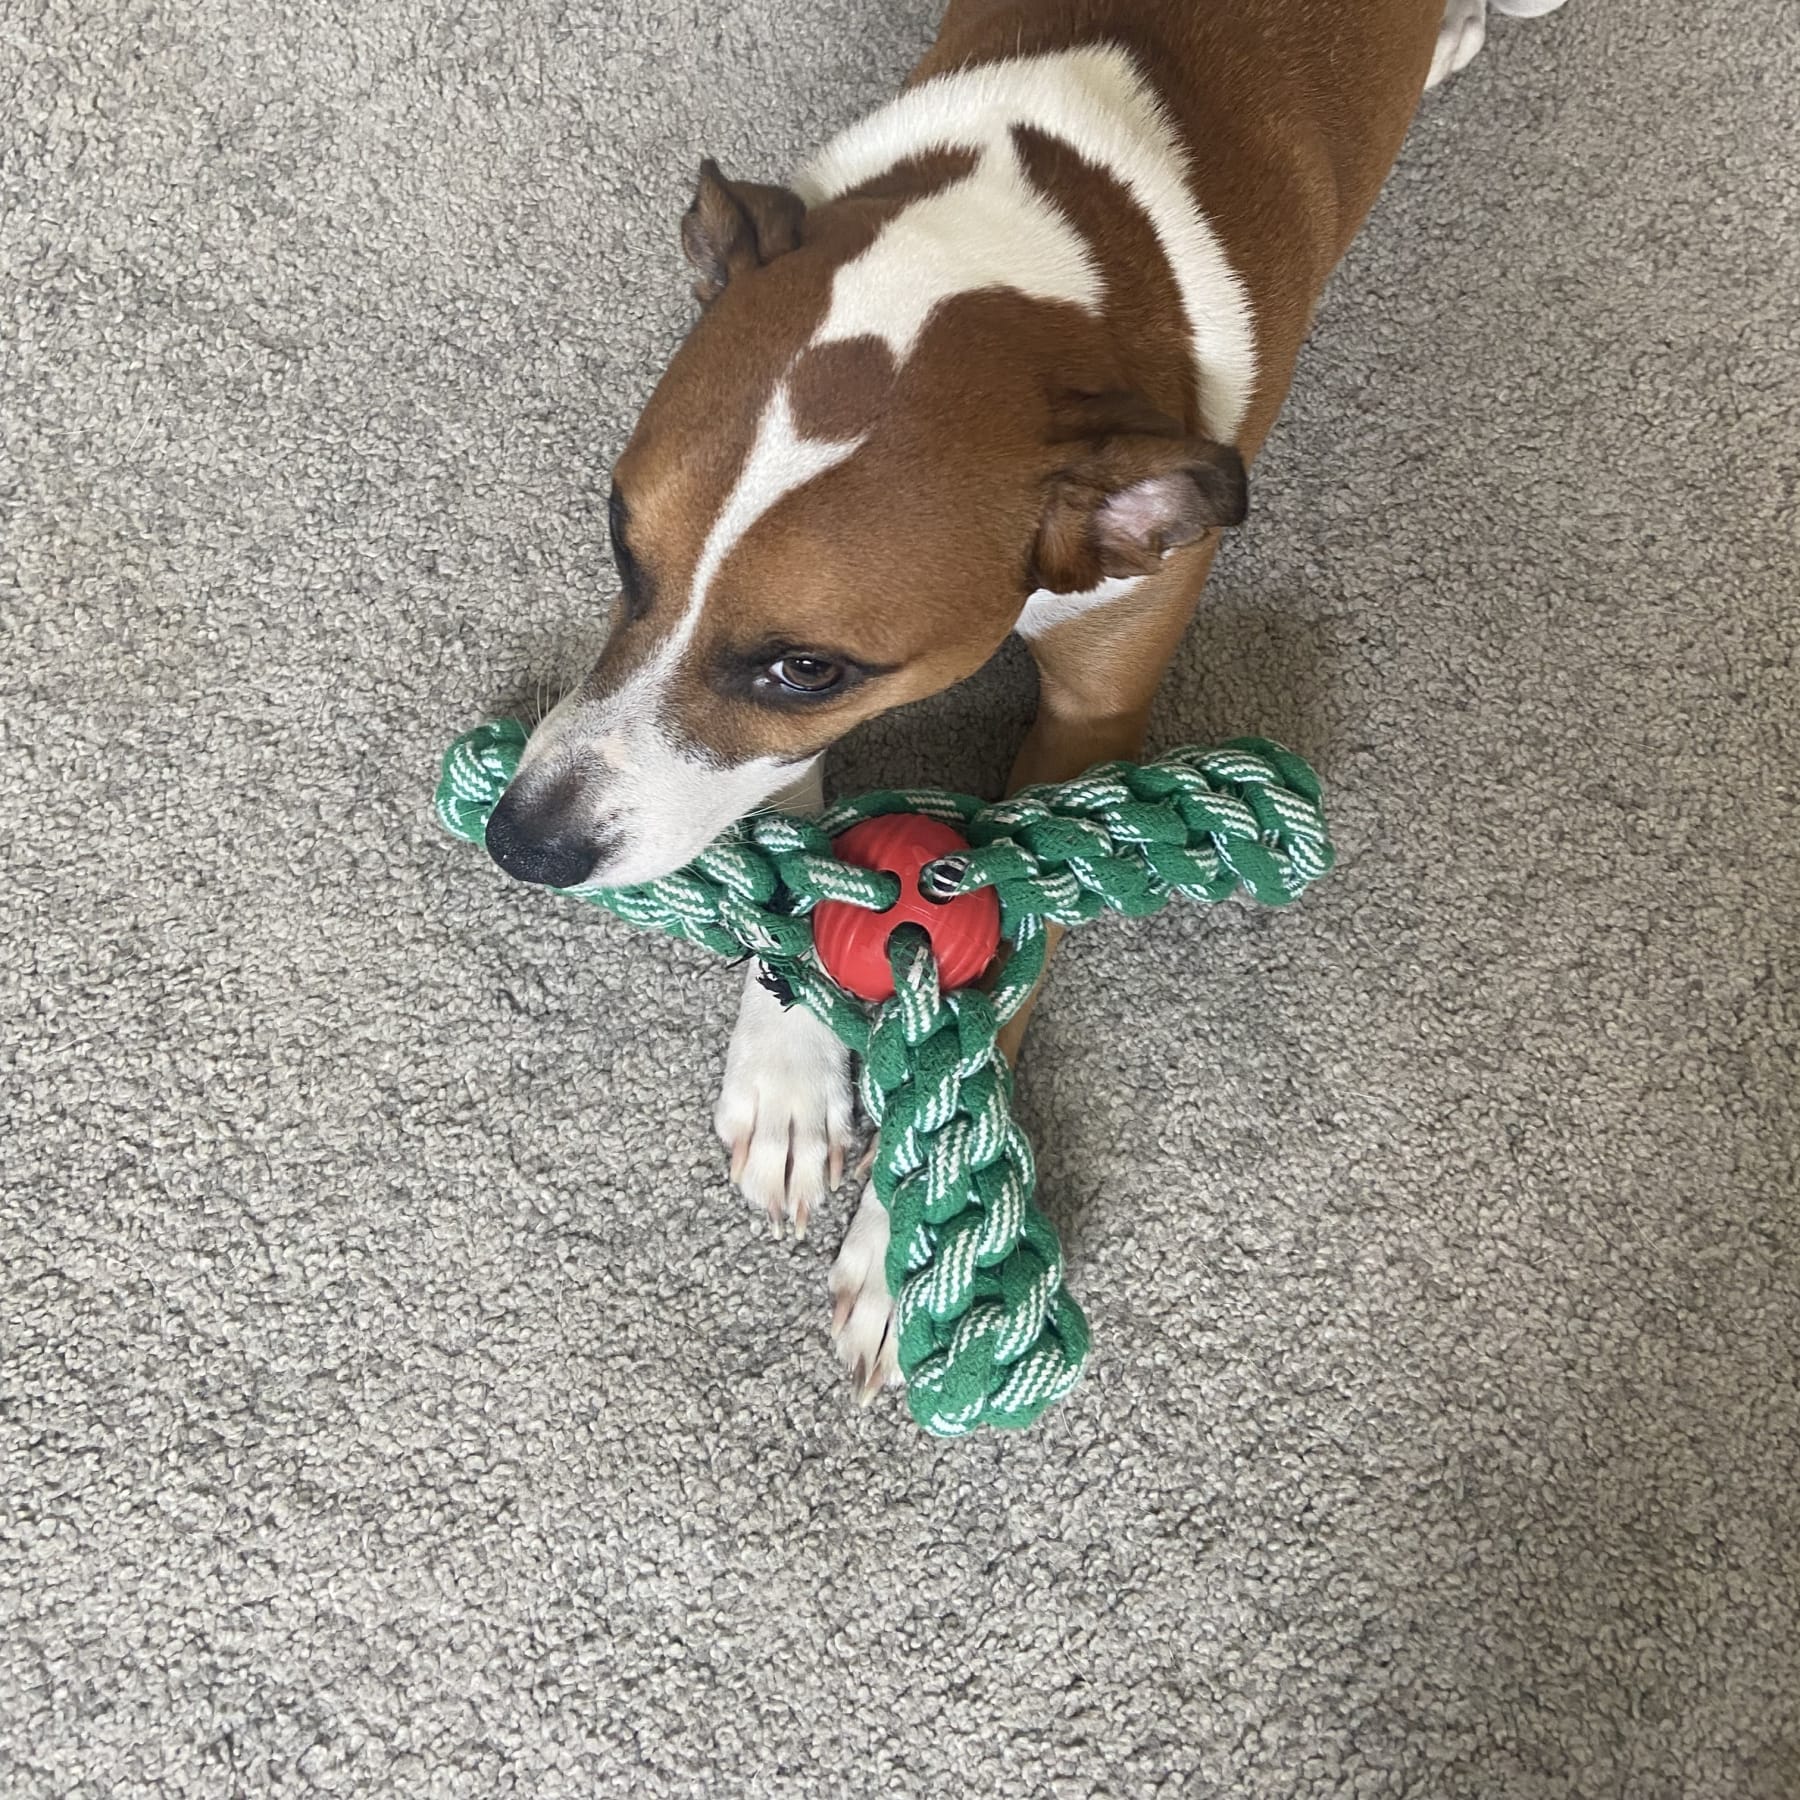 Brown-and-white dog chews on rope toy.